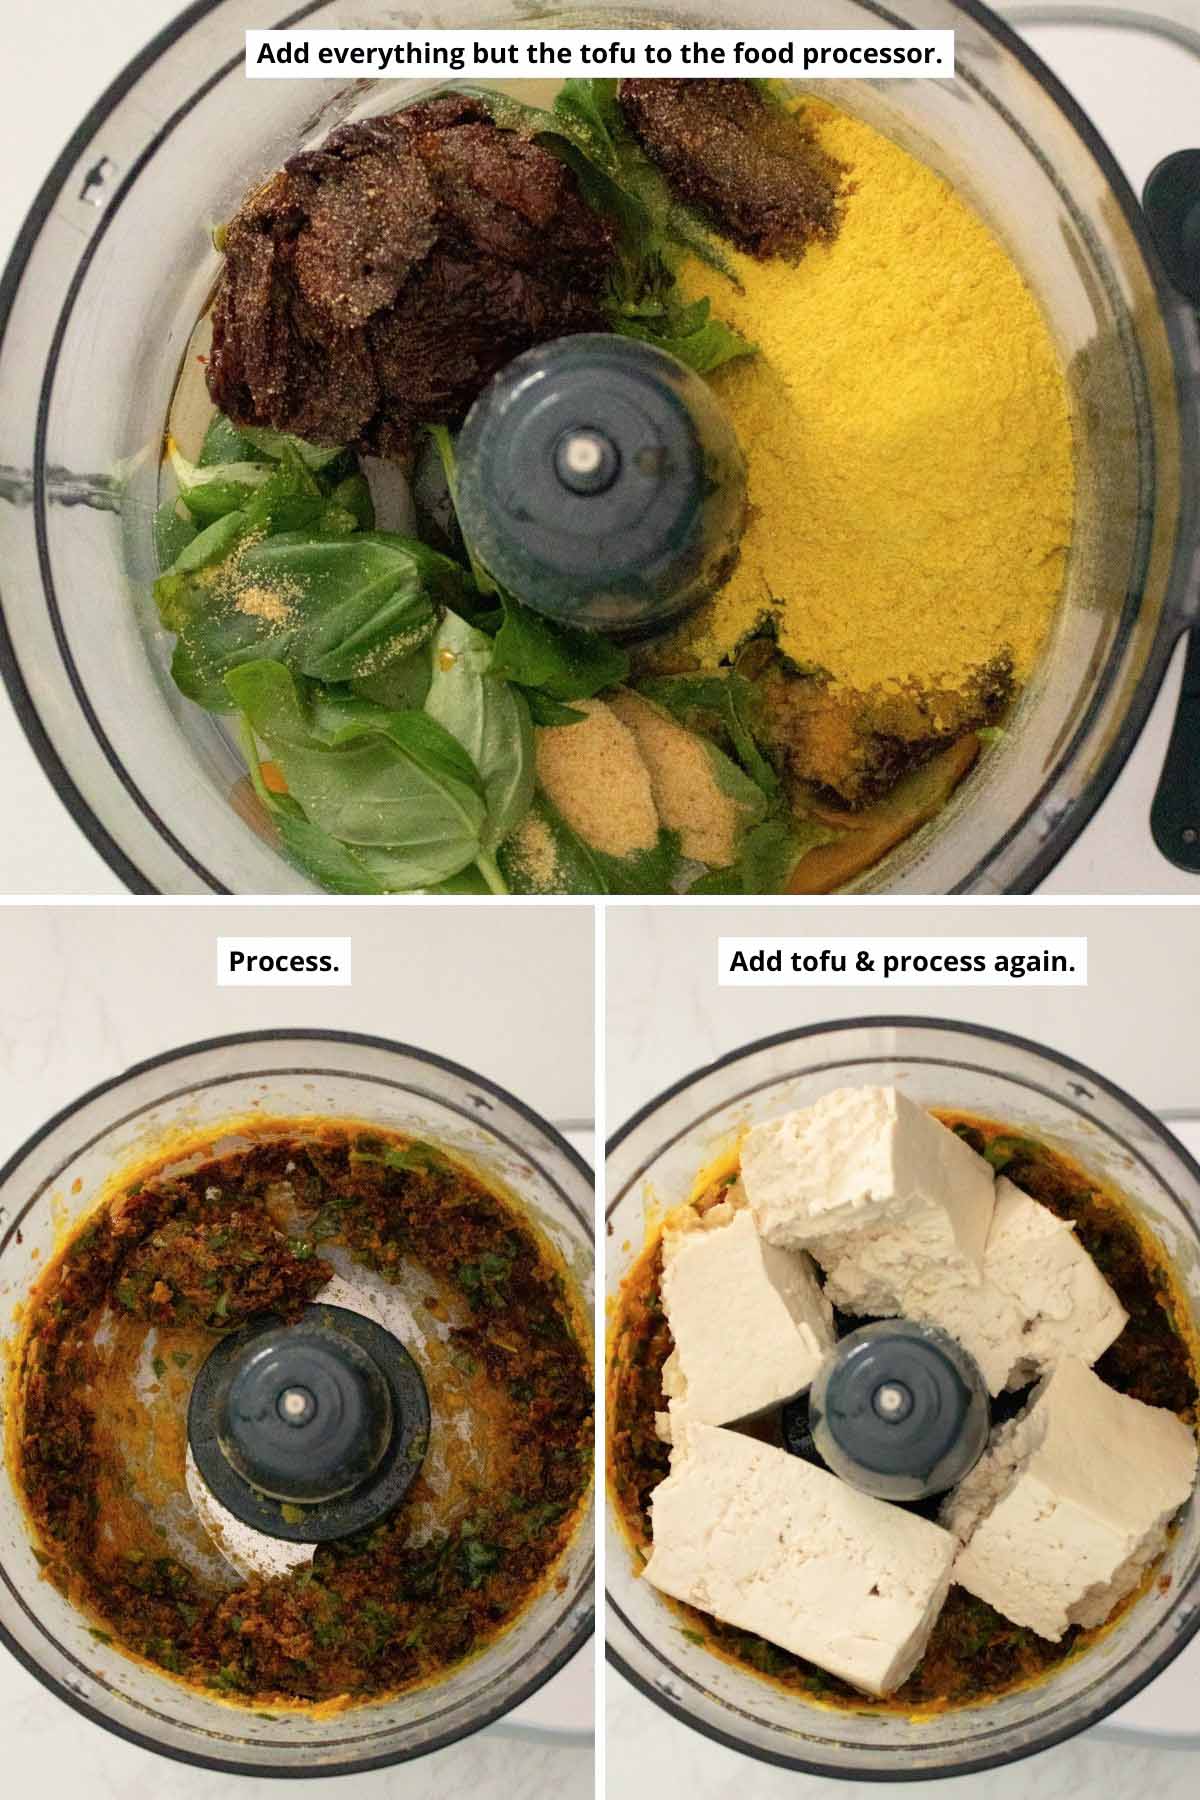 food processor before and after blending tomato-basil mixture and with tofu added